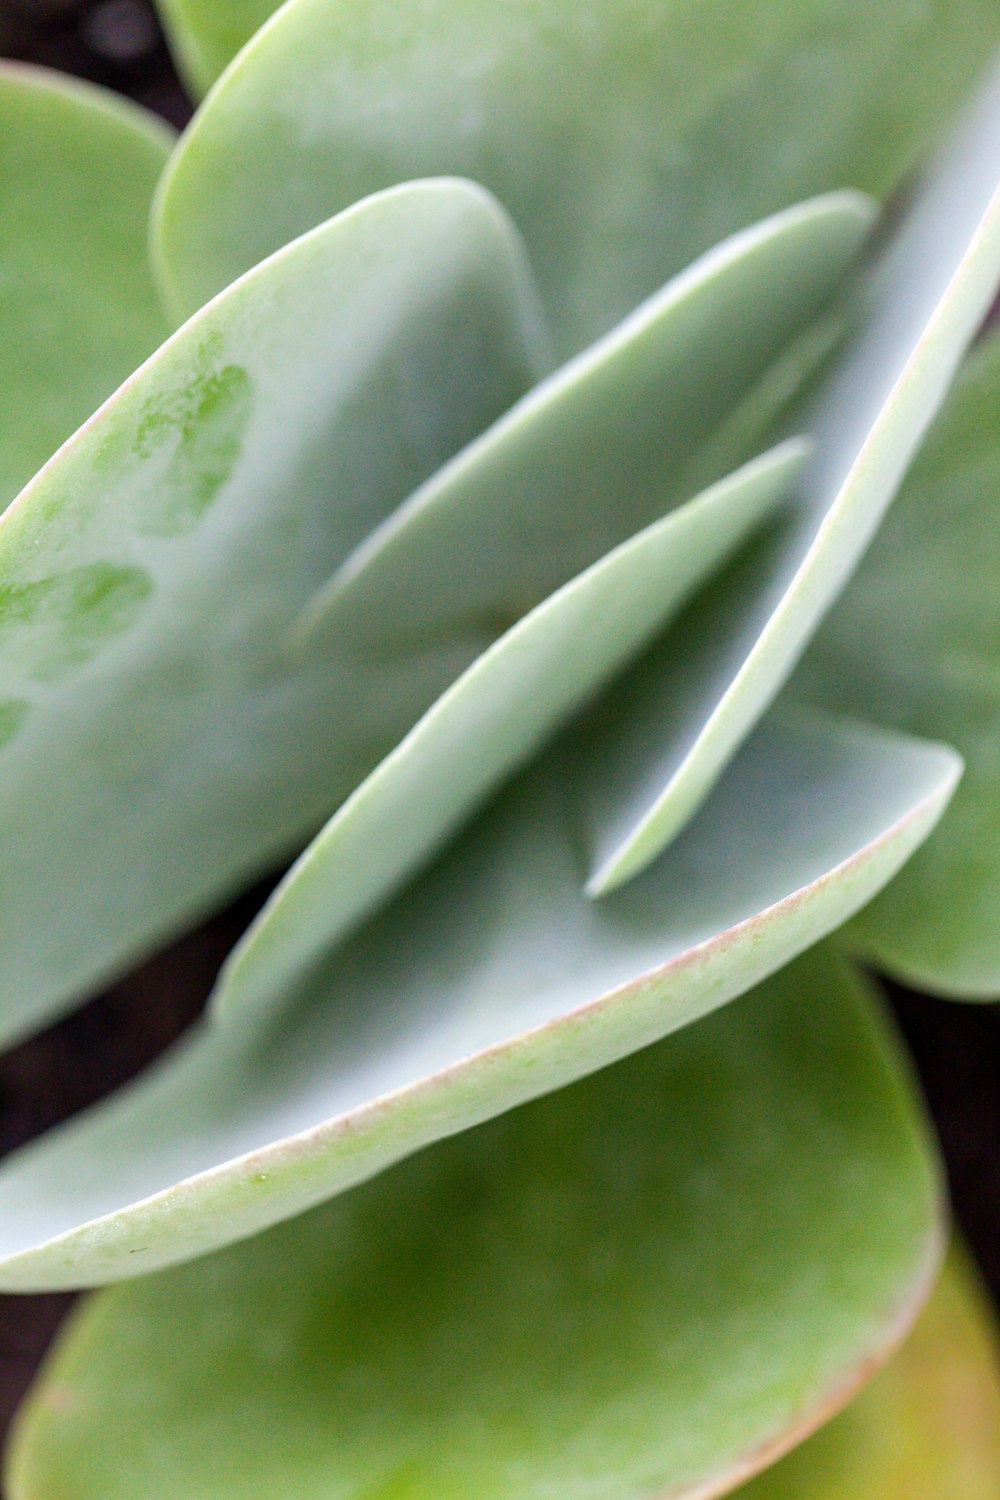 green and white plant in close up photography